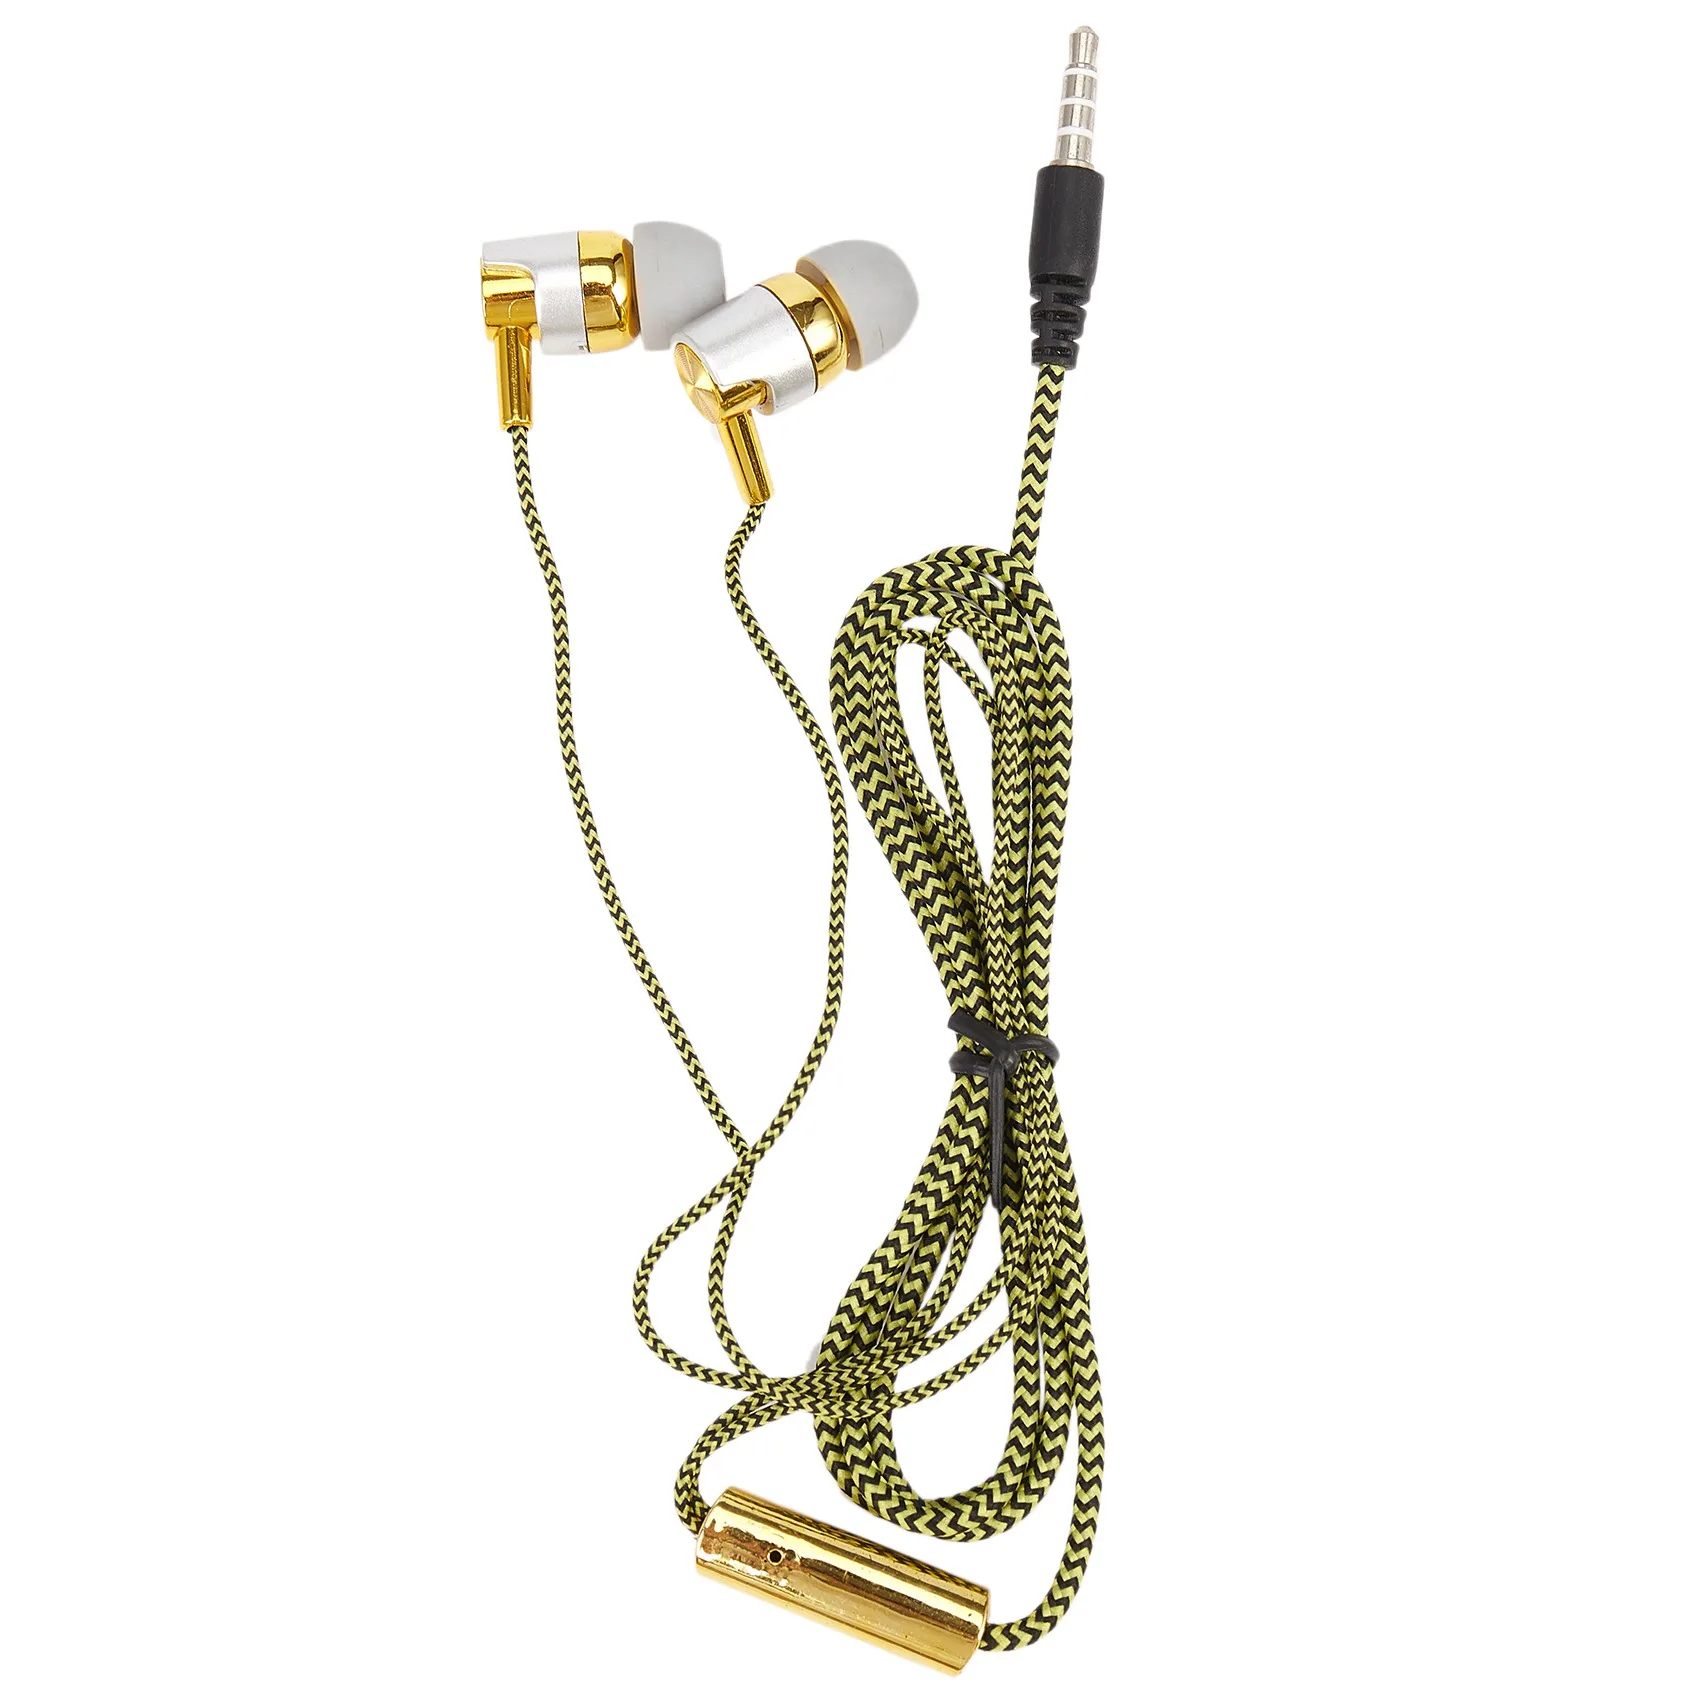 

H-169 3.5mm MP3 MP4 Wiring Subwoofer Braided Cord, Universal Music Headphones with Wheat Wire Control(Golden)